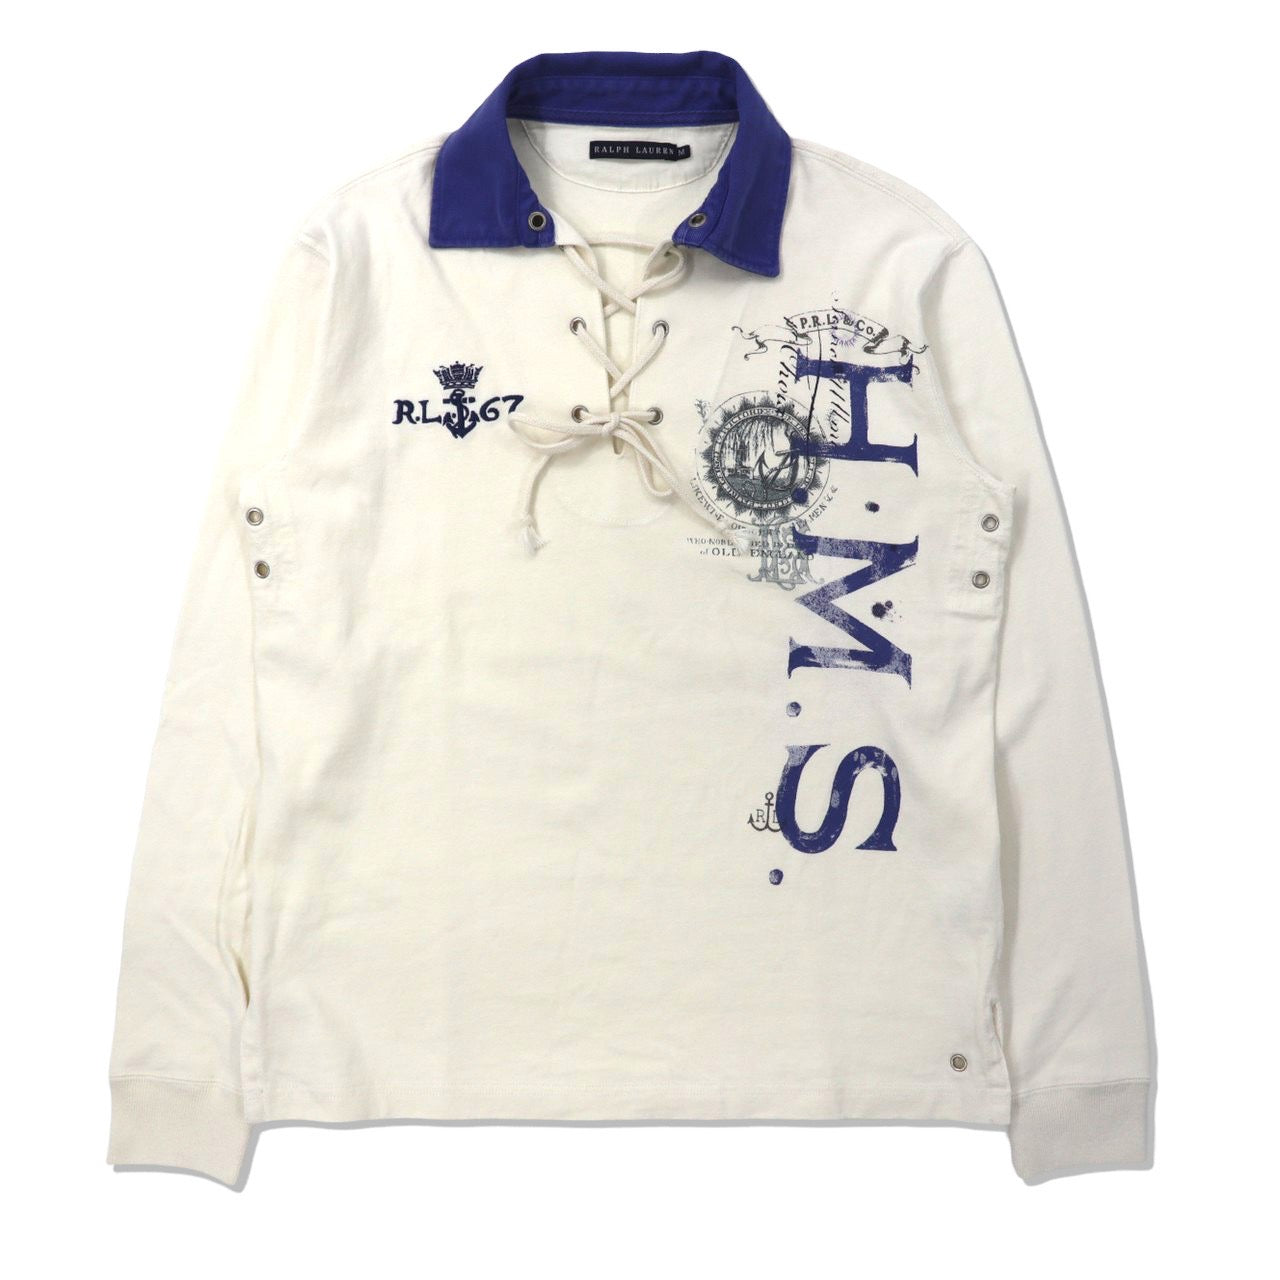 RALPH LAUREN Lace -up RUGBY SHIRT M White Cotton Logo Embroidery